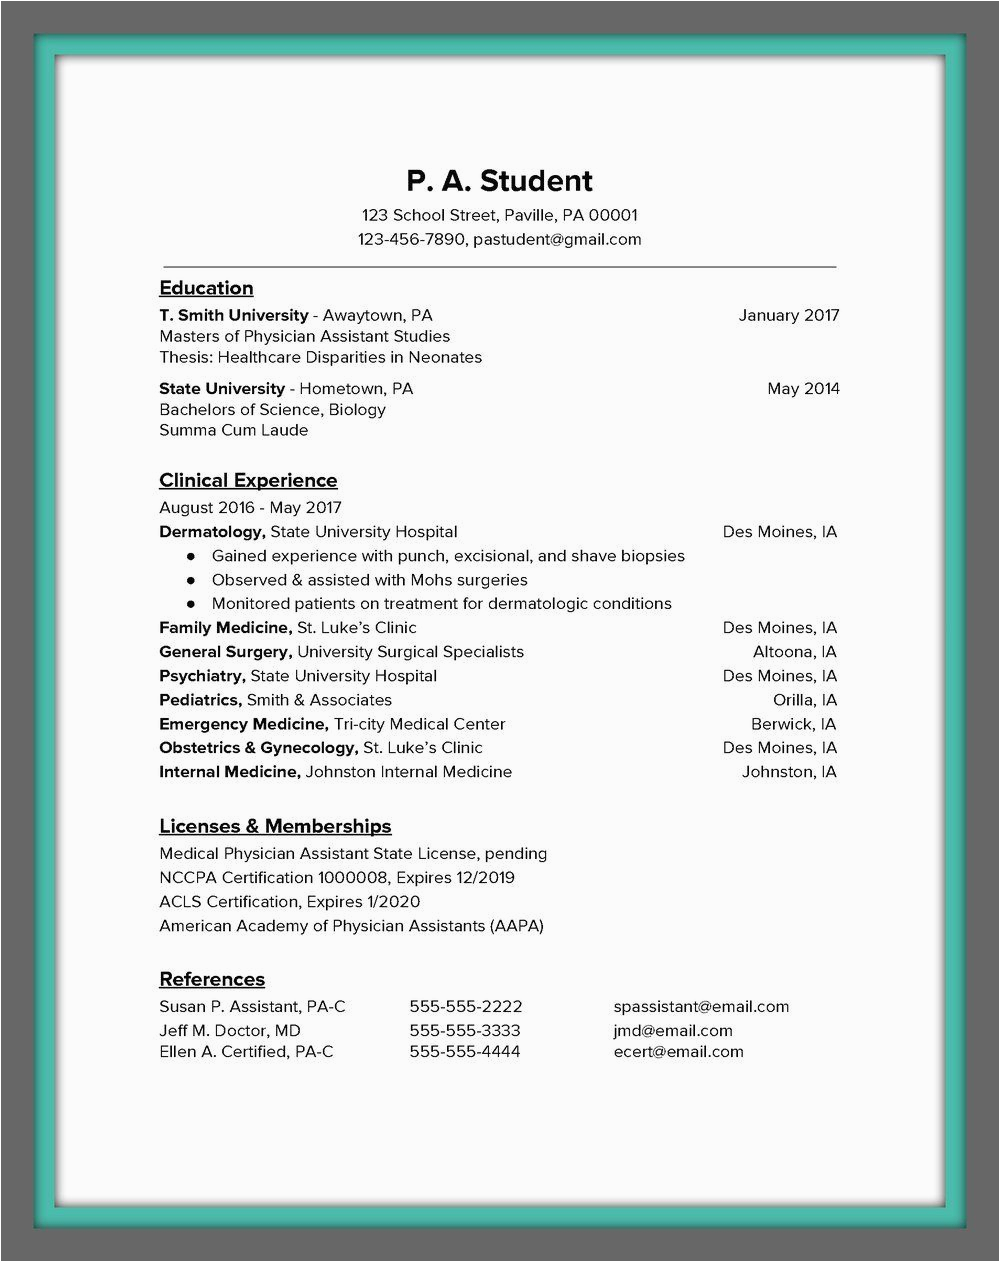 Sample Resume for Physician assistant School Image Result for Physician assistant Resume